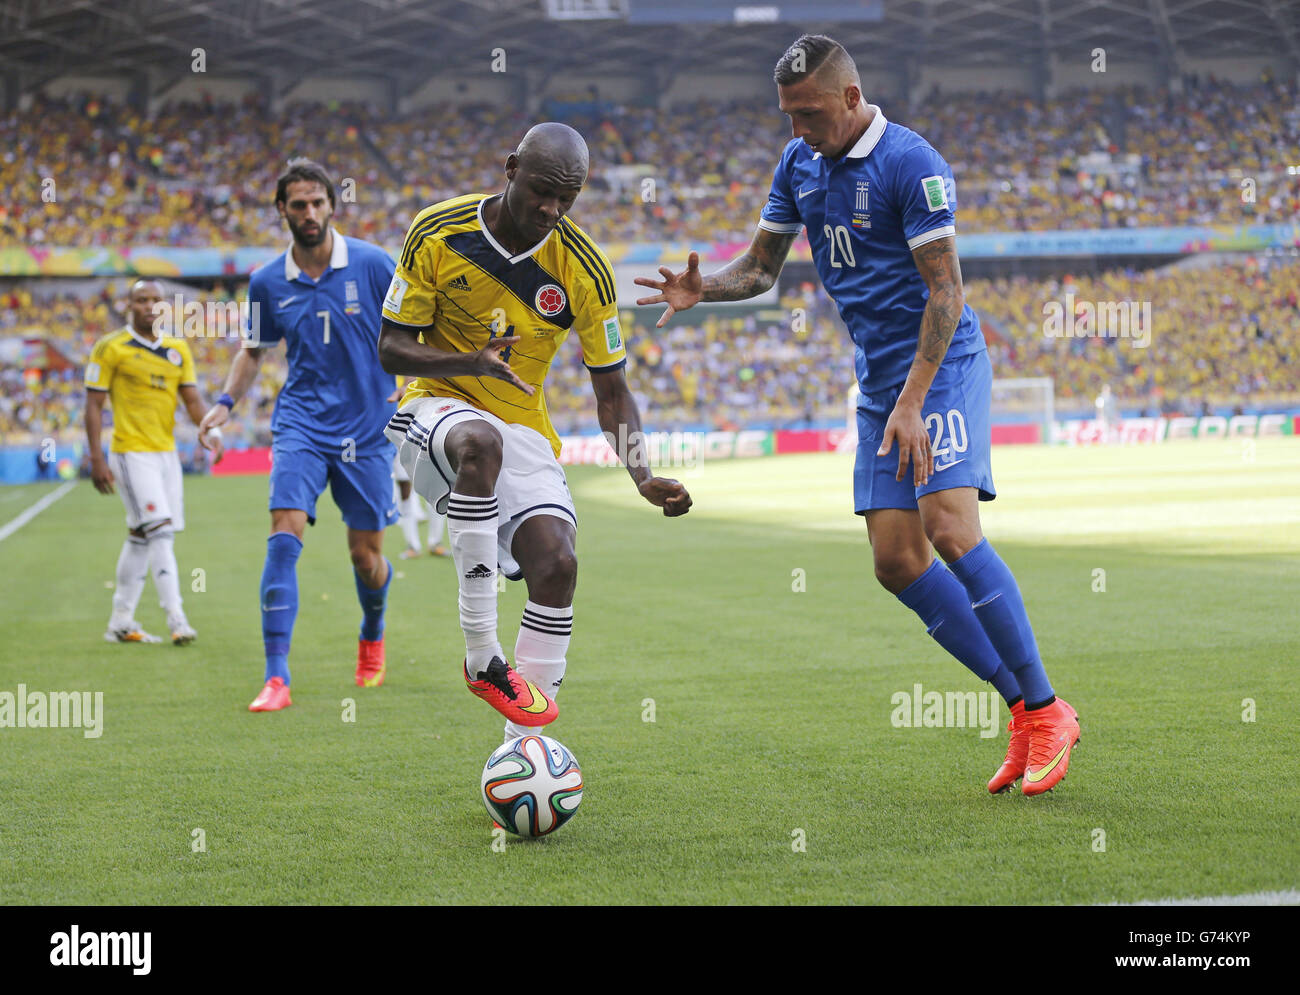 Colombia's Victor Ibarbo and Greece's Jose Holebas battle for the ball during the group C World Cup soccer match between Colombia and Greece at the Mineirao Stadium in Belo Horizonte, Brazil, Saturday, June 14, 2014. (AP Photo/Frank Augstein) Stock Photo